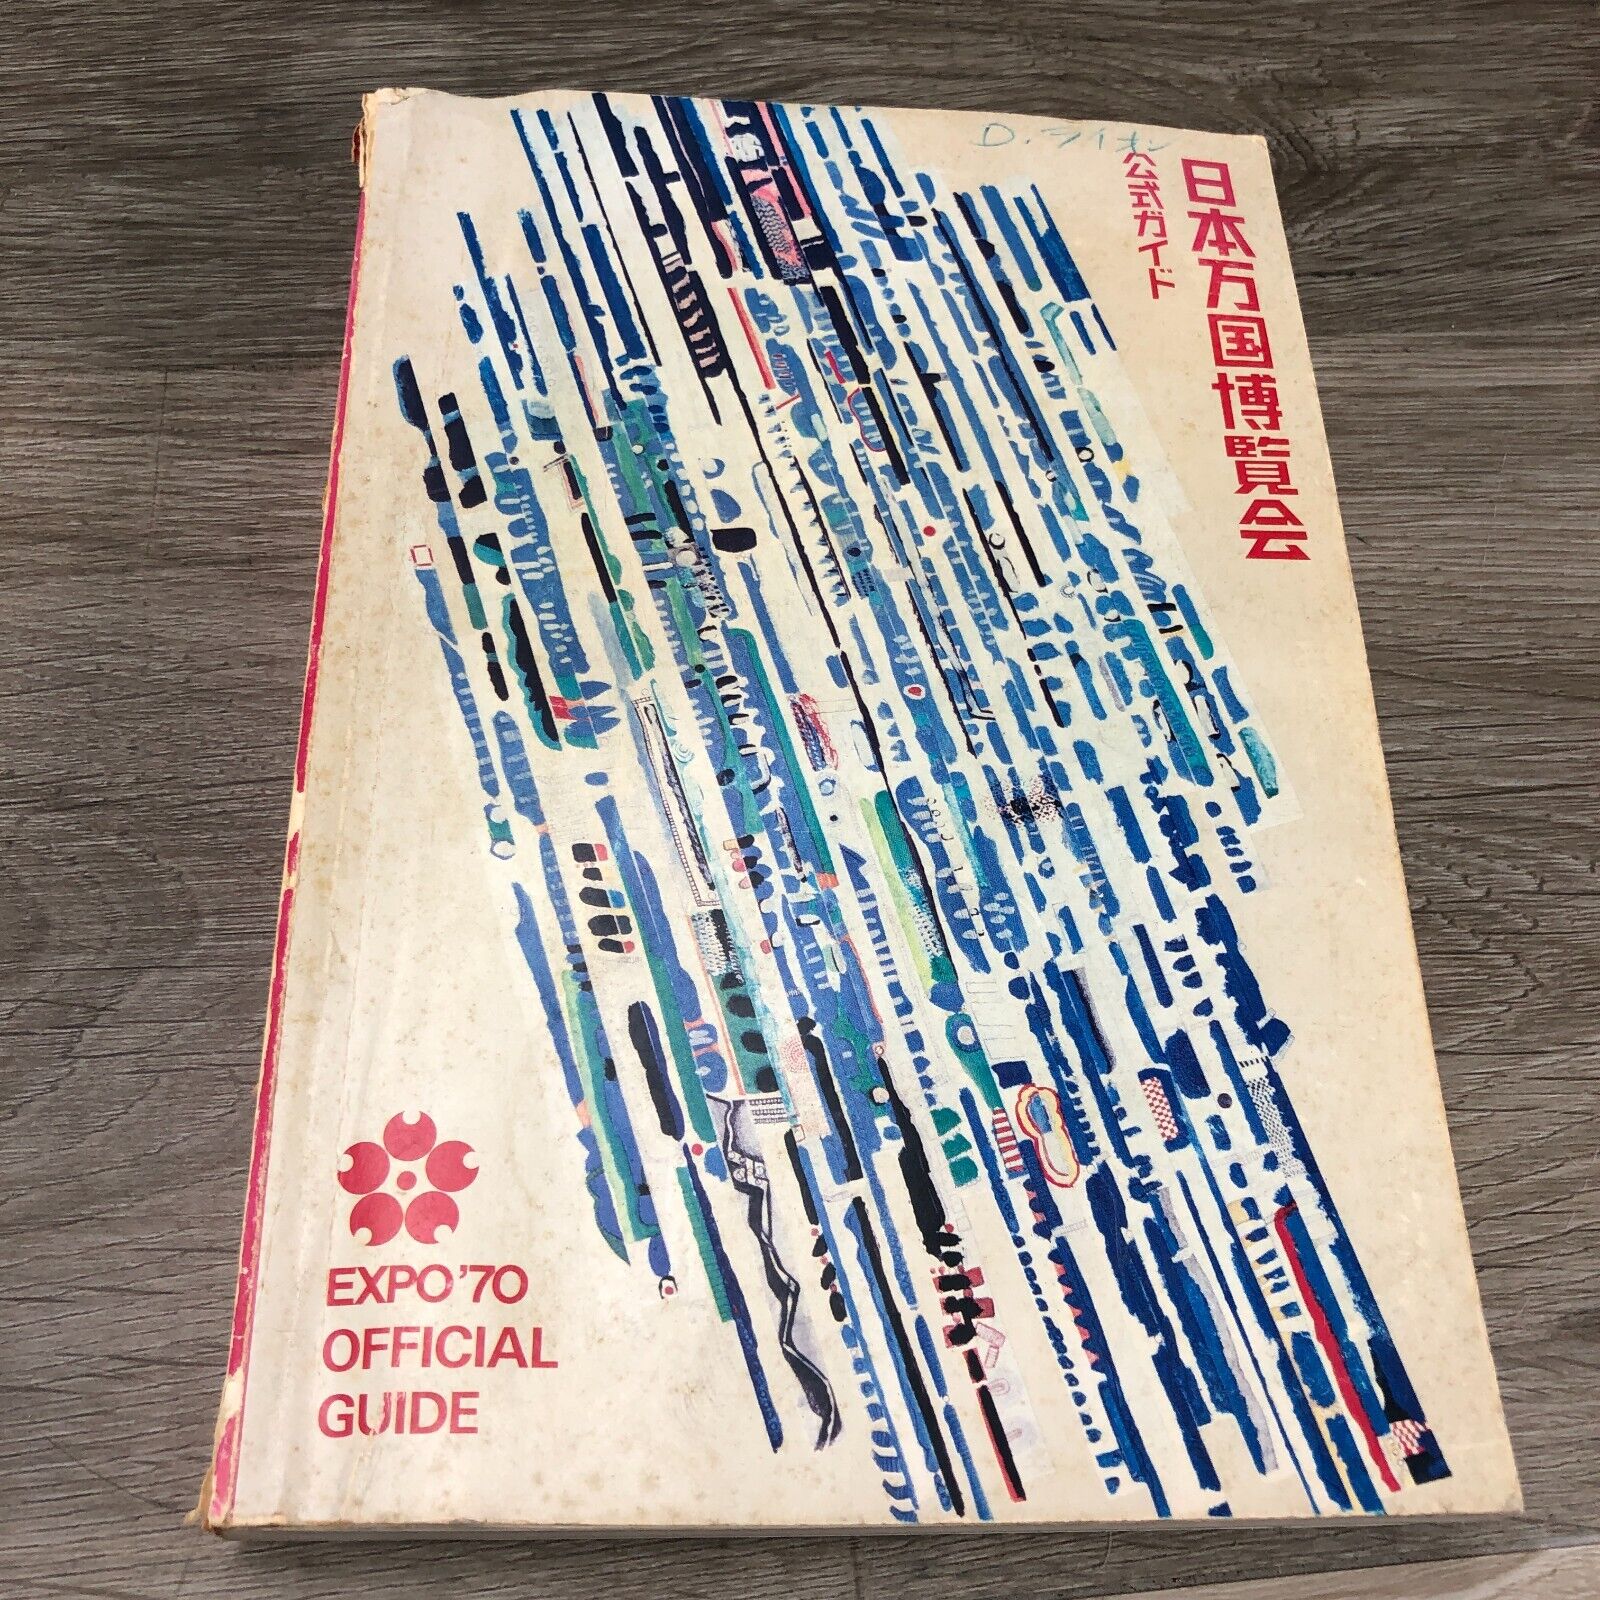 The Official Guidebook of the Japan World's Fair held in 1970 EXPO 70 Osaka